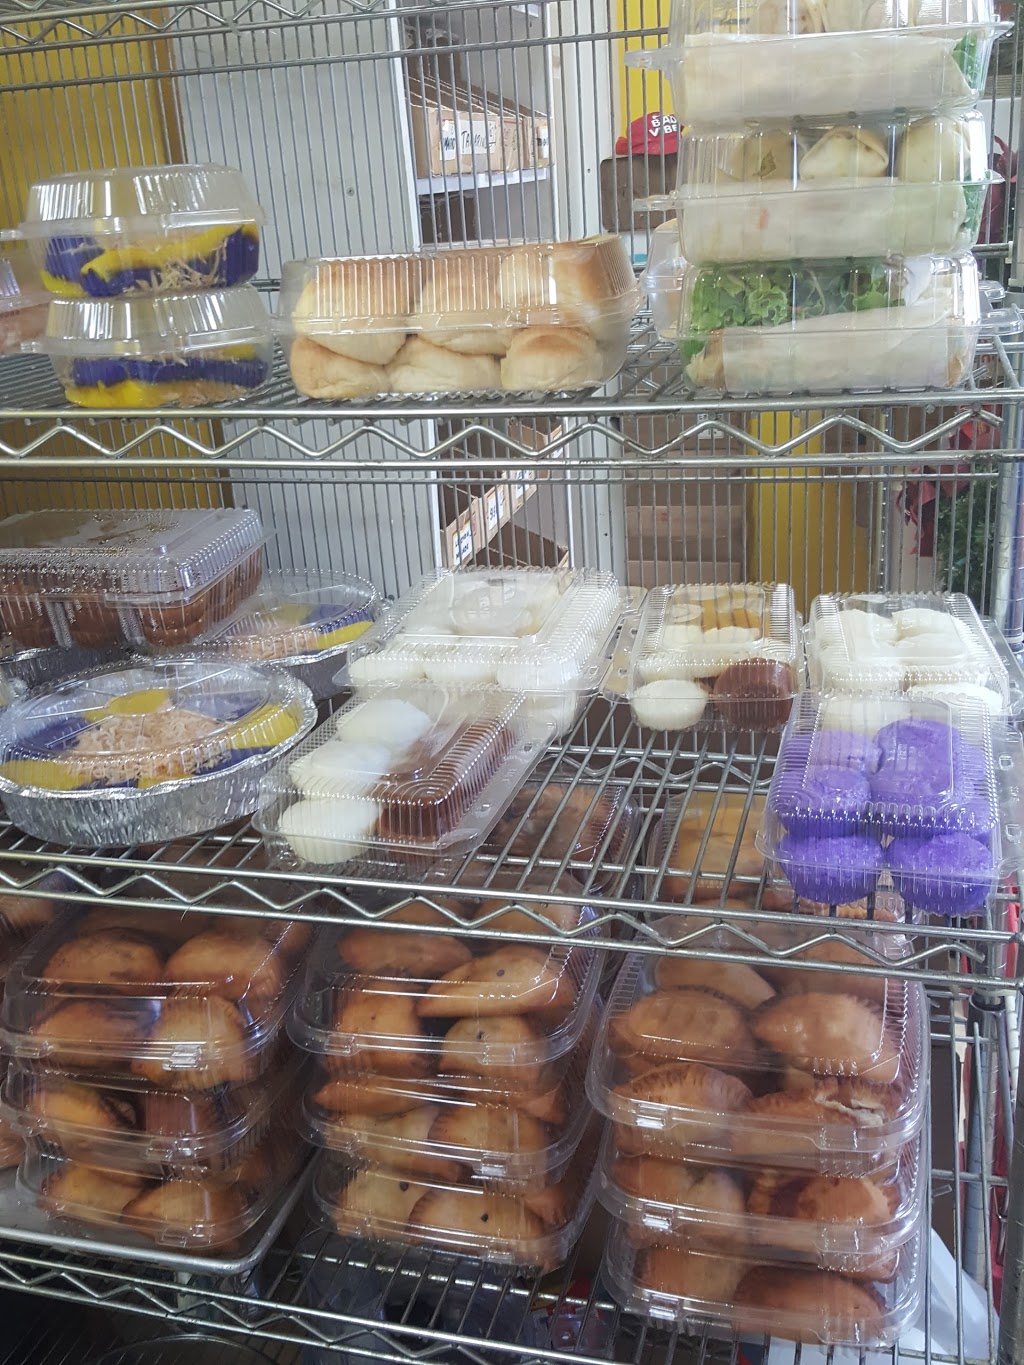 Mendozas Bakery | bakery | 1071 Danforth Rd, Scarborough, ON M1J 1E4, Canada | 4162675878 OR +1 416-267-5878